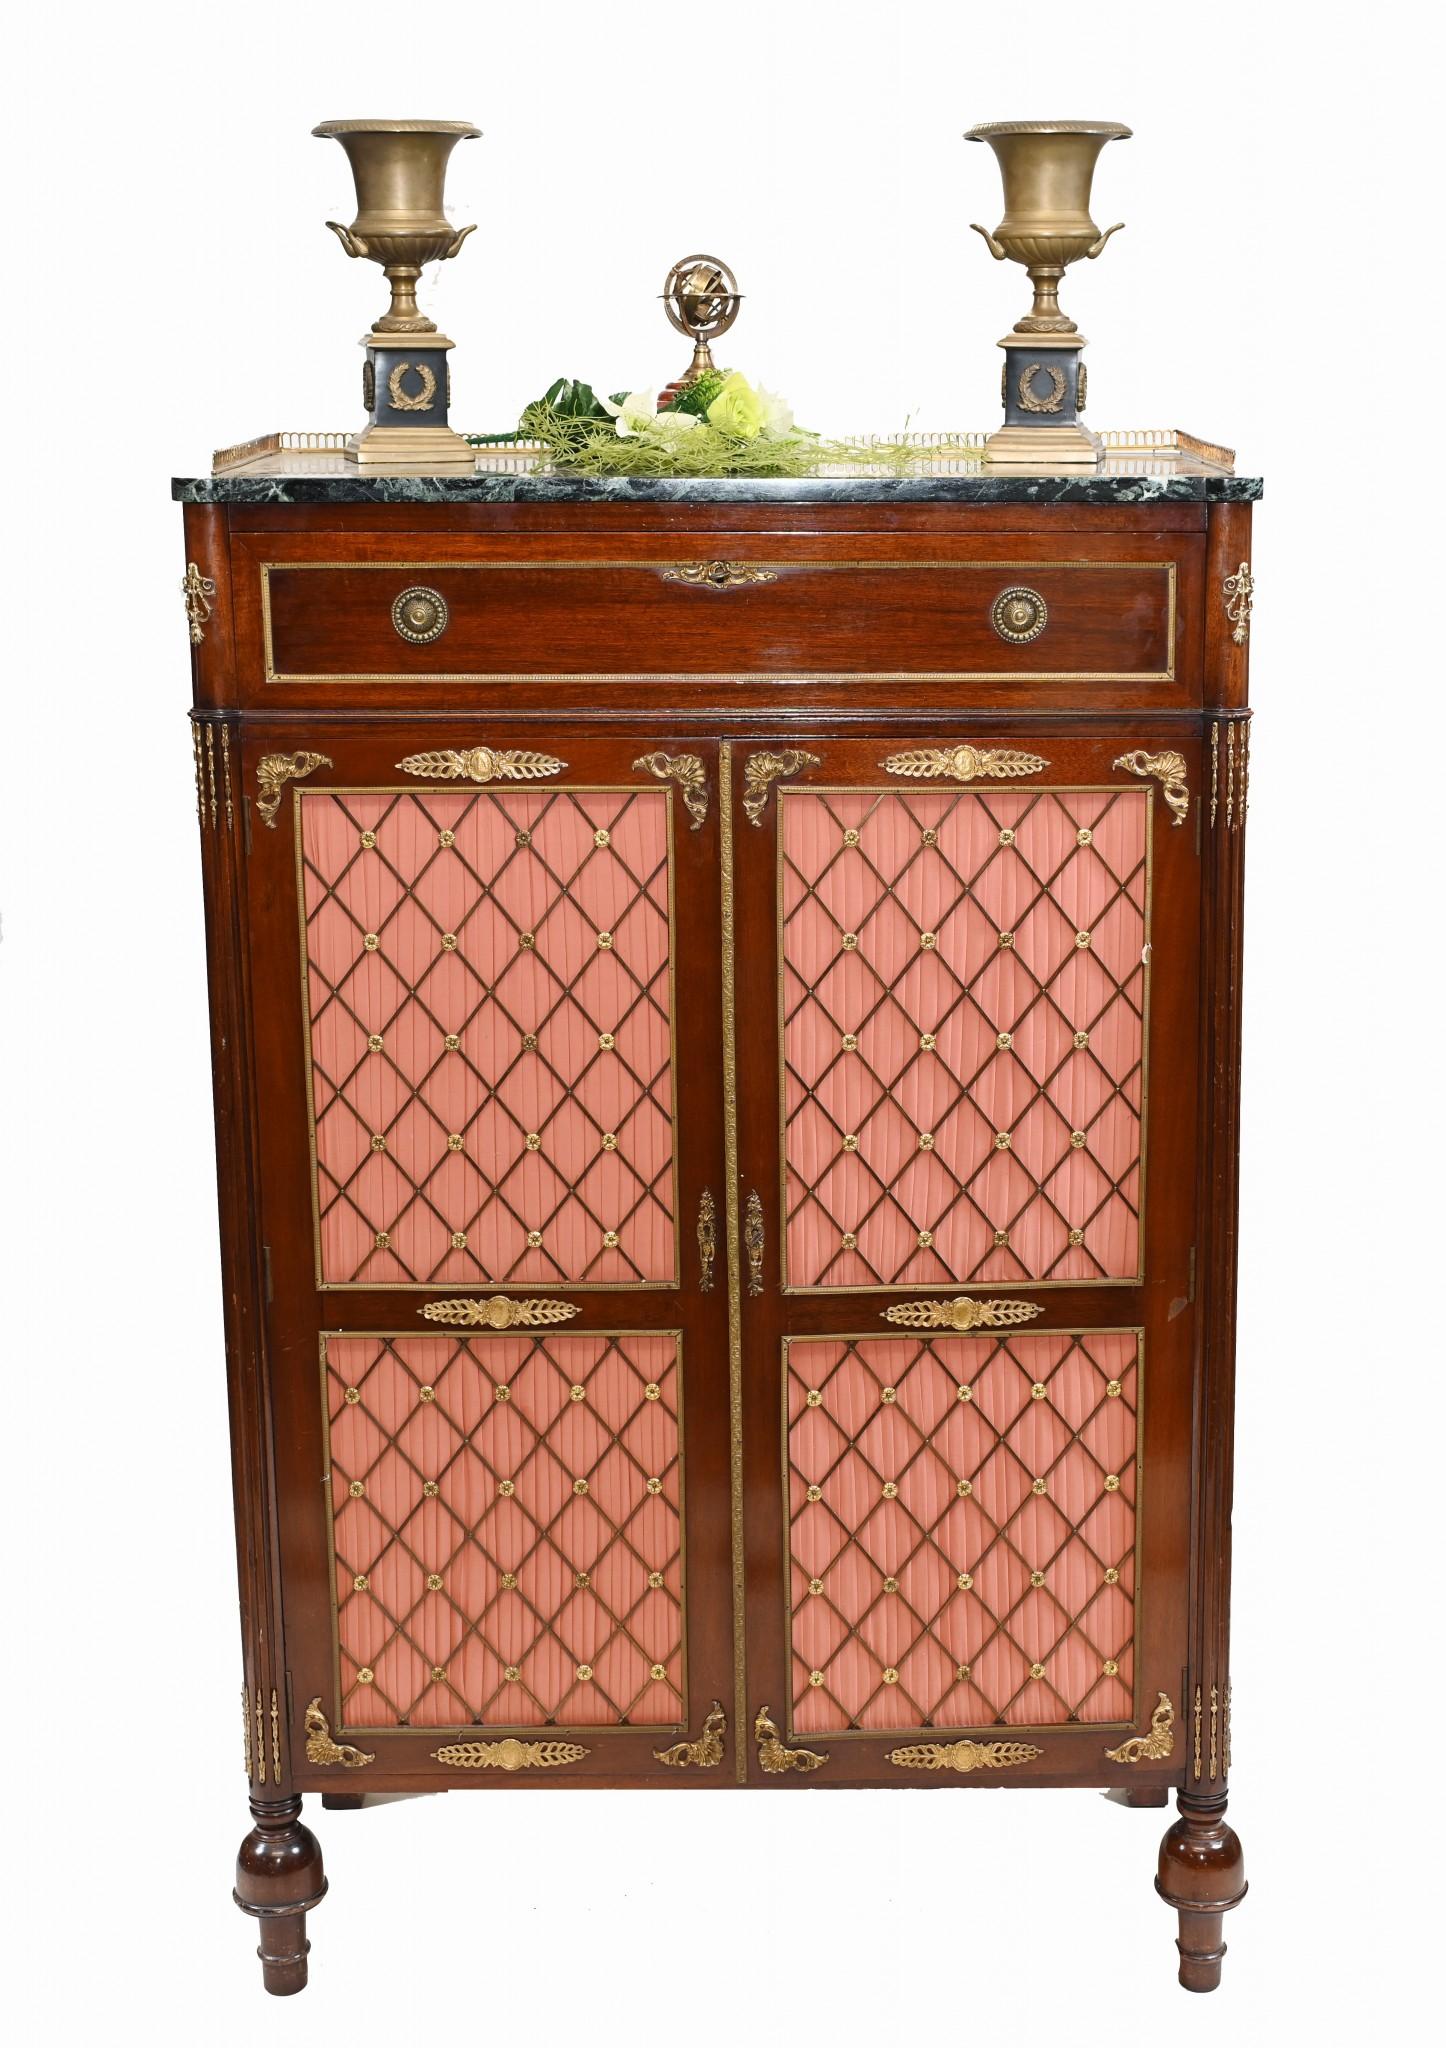 Elegant French Empire style cocktail cabinet in mahogany
Bought from a dealer on Marche Biron at the Paris antiques markets
Cocktail cabinet decorated with ormolu mounts, the doors with original diamond pattern bronze design
Circa 1890
Some of our